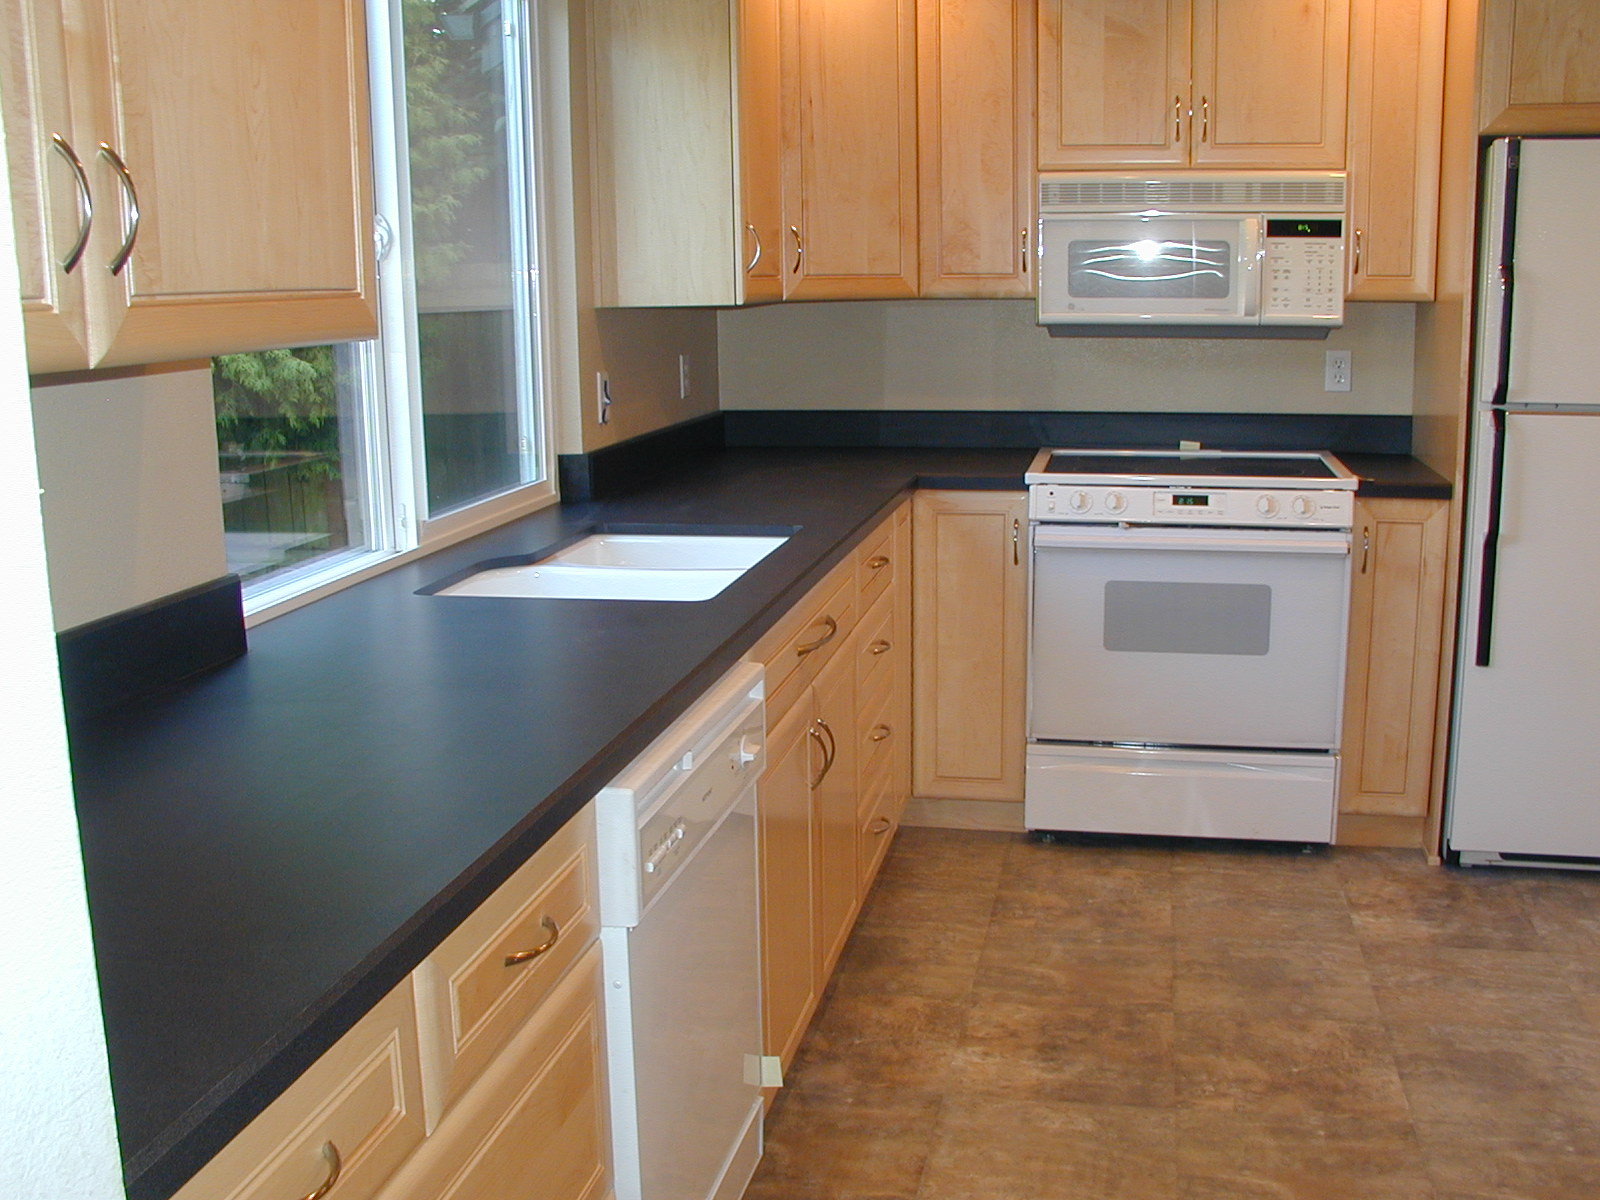 Cheapest Kitchen Countertops
 Inexpensive Kitchen Countertop to Consider – HomesFeed